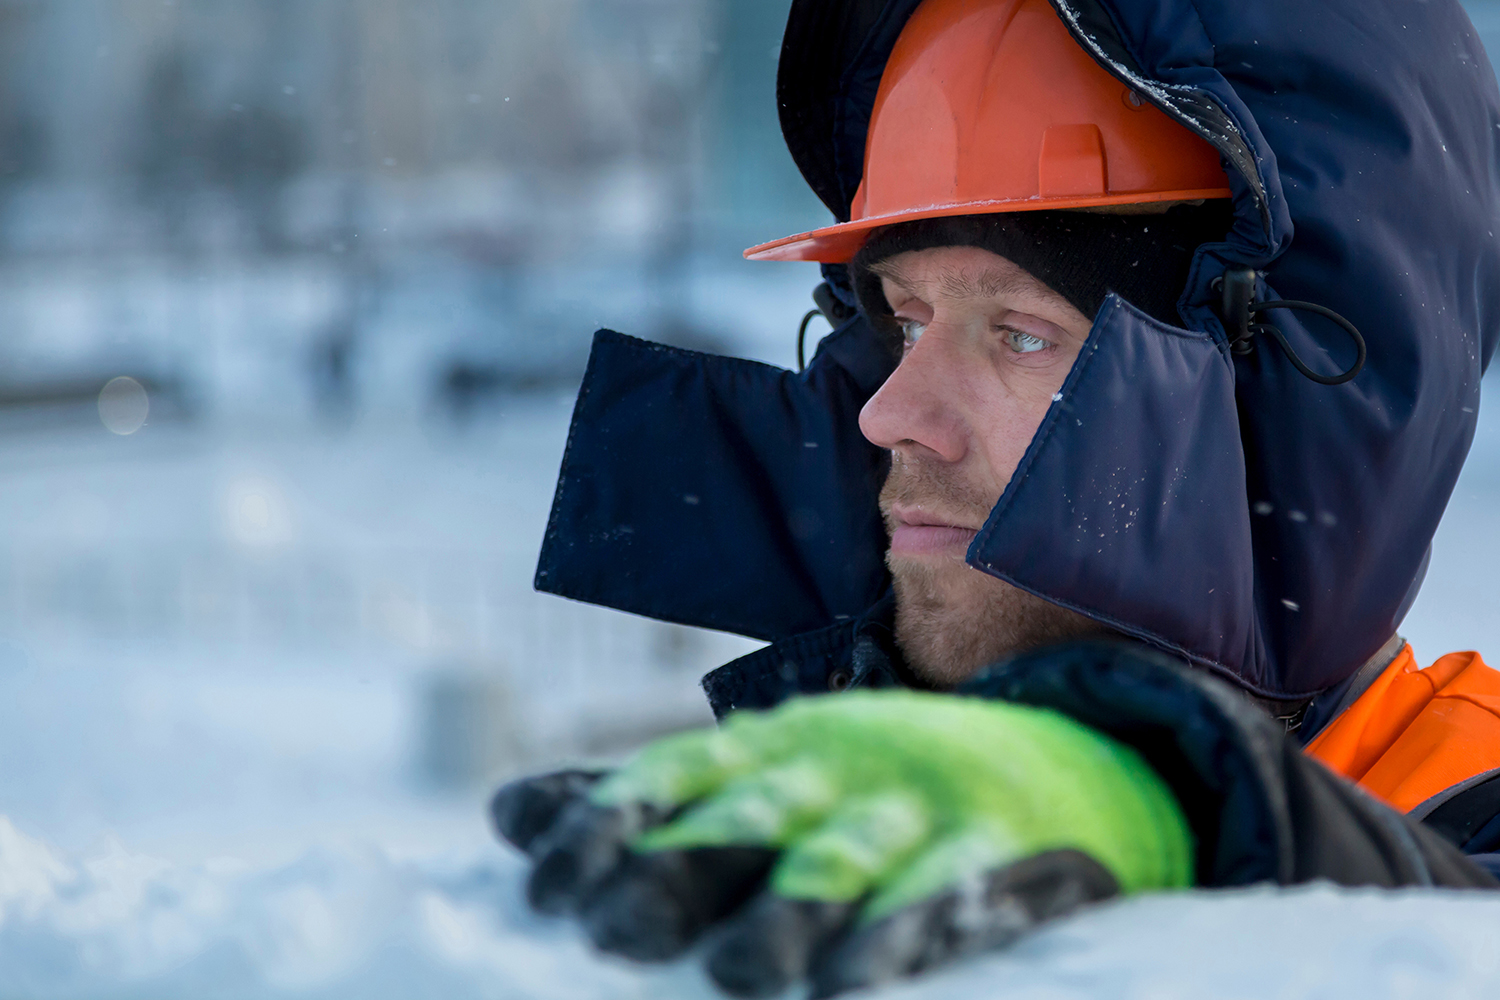 layer winter workwear for warmth safety